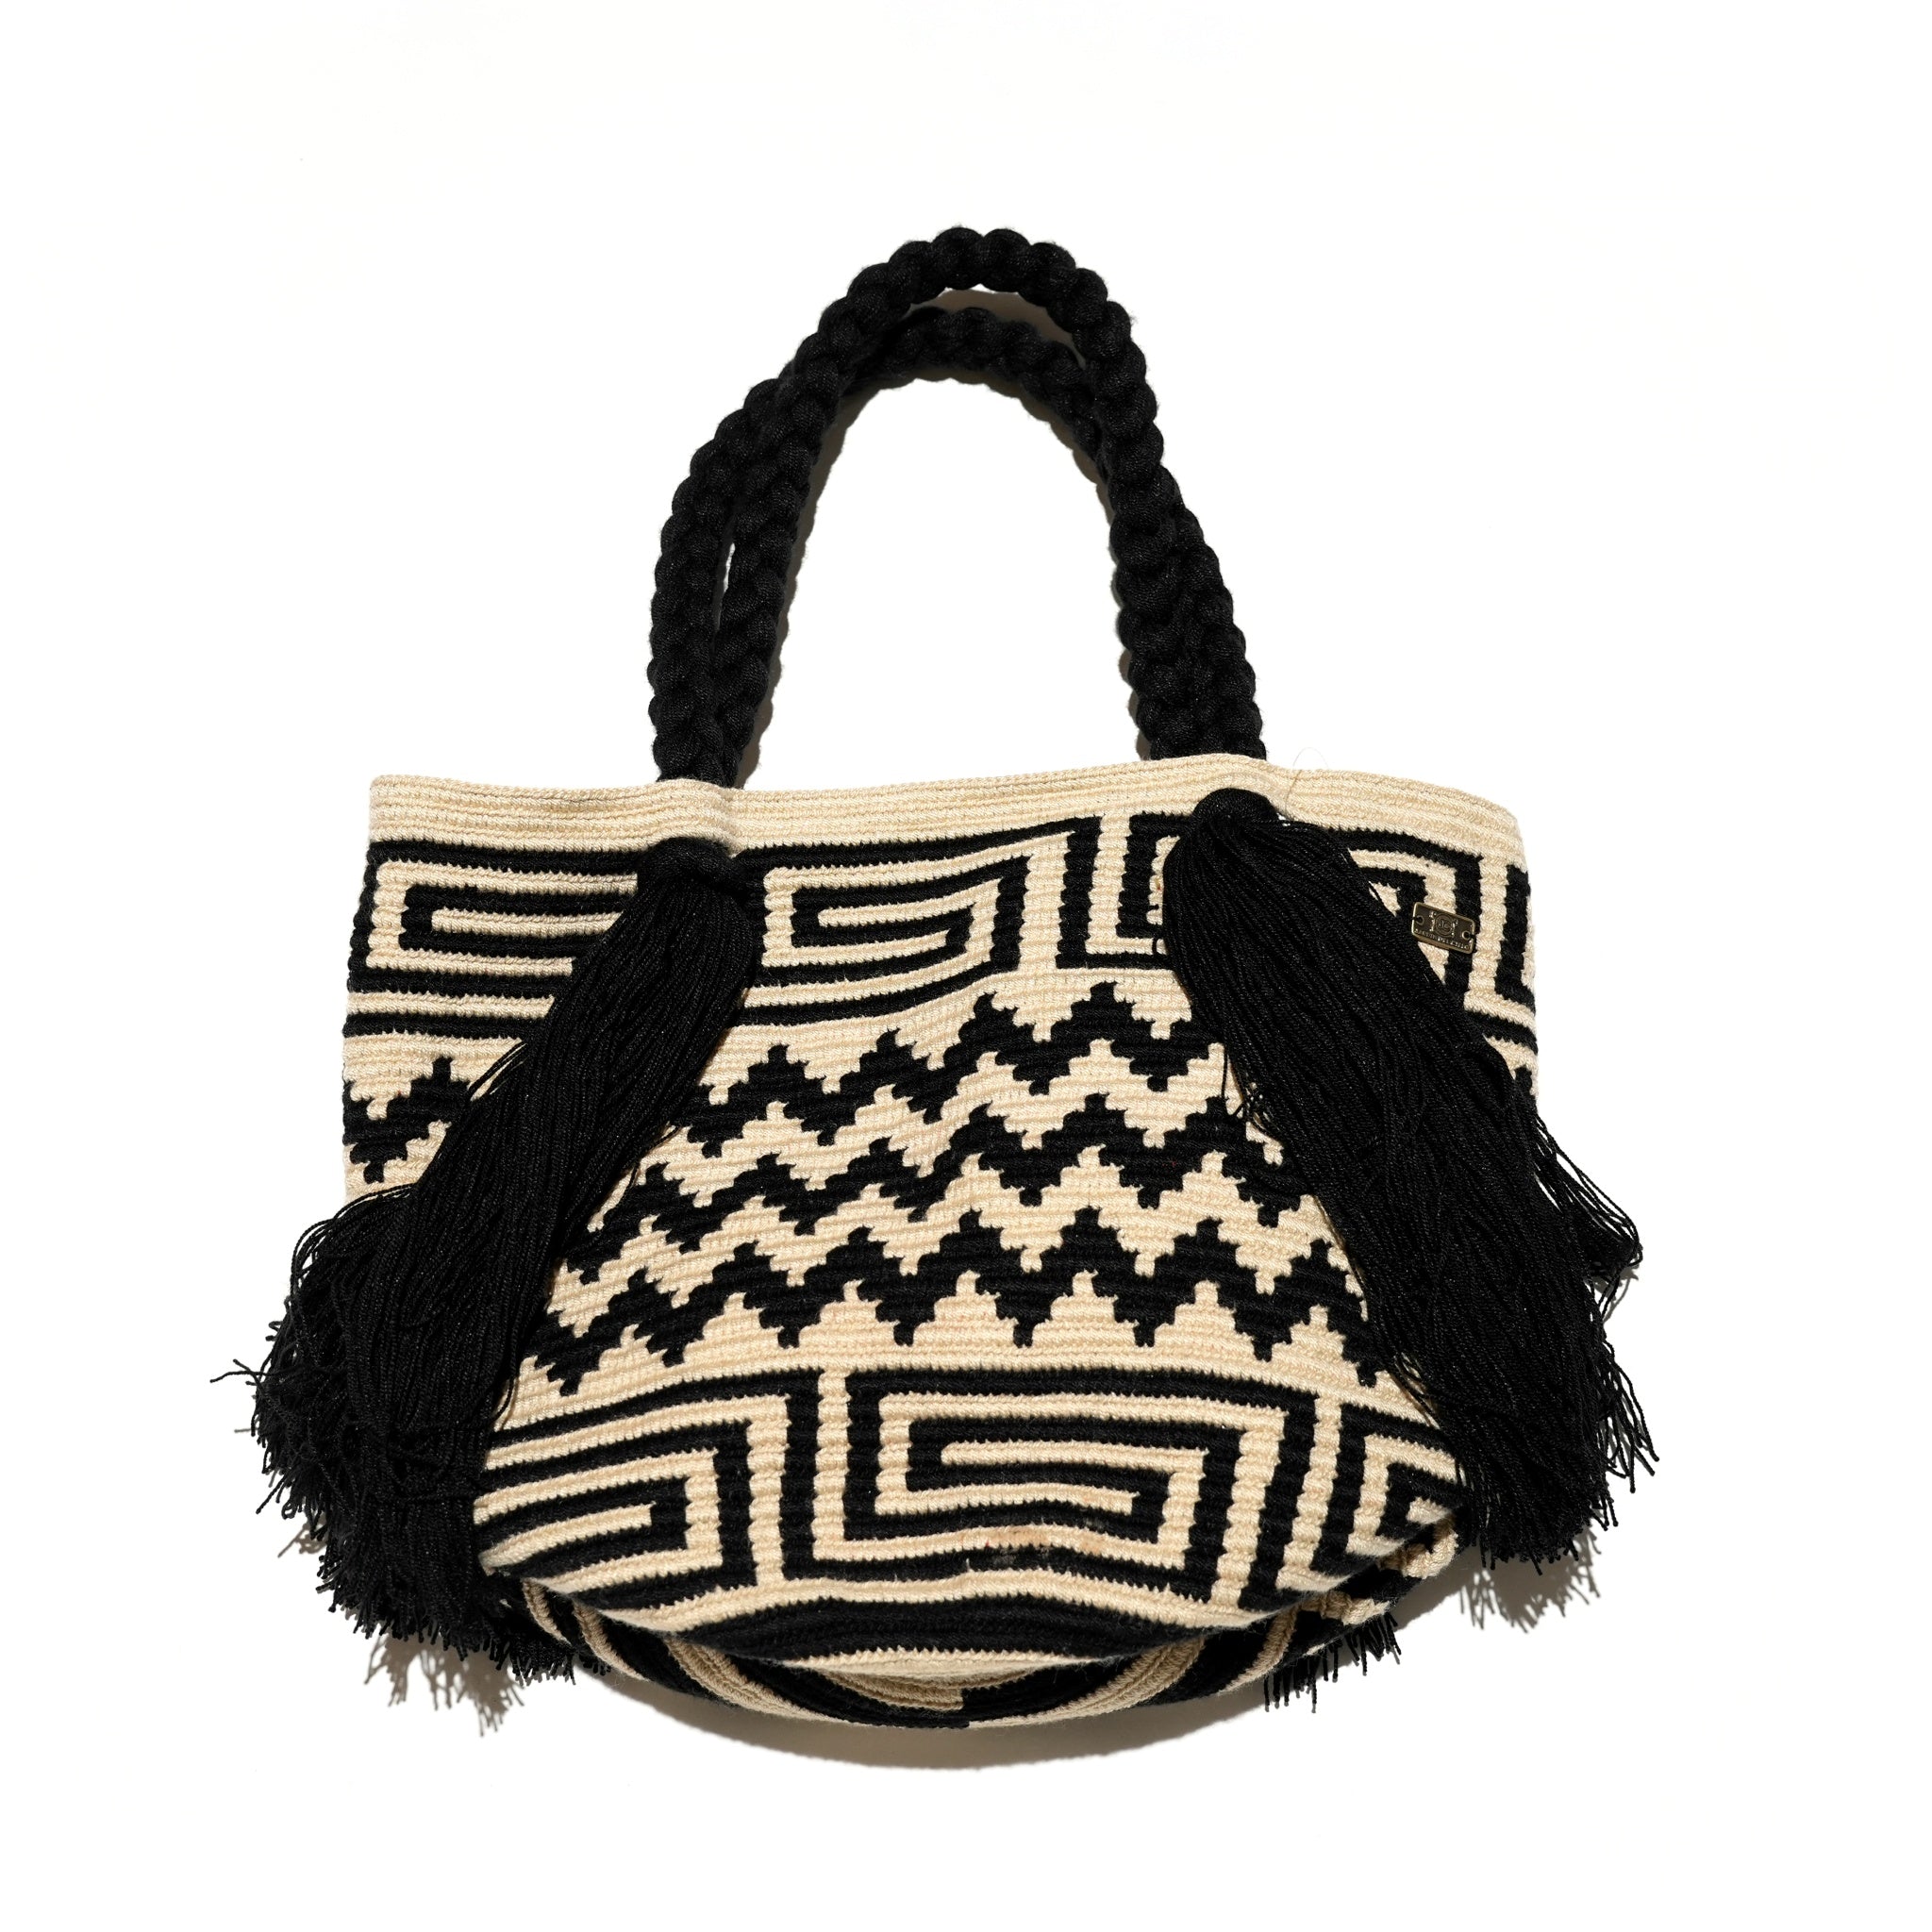 No:JA-24SS-TRAD1 | Name:TRADITIONAL Wayuú Purse in Classic Style  | Color:#87 Black-#139 Ivory【JARDIN DEL CIELO_ジャーディン デル シエロ】